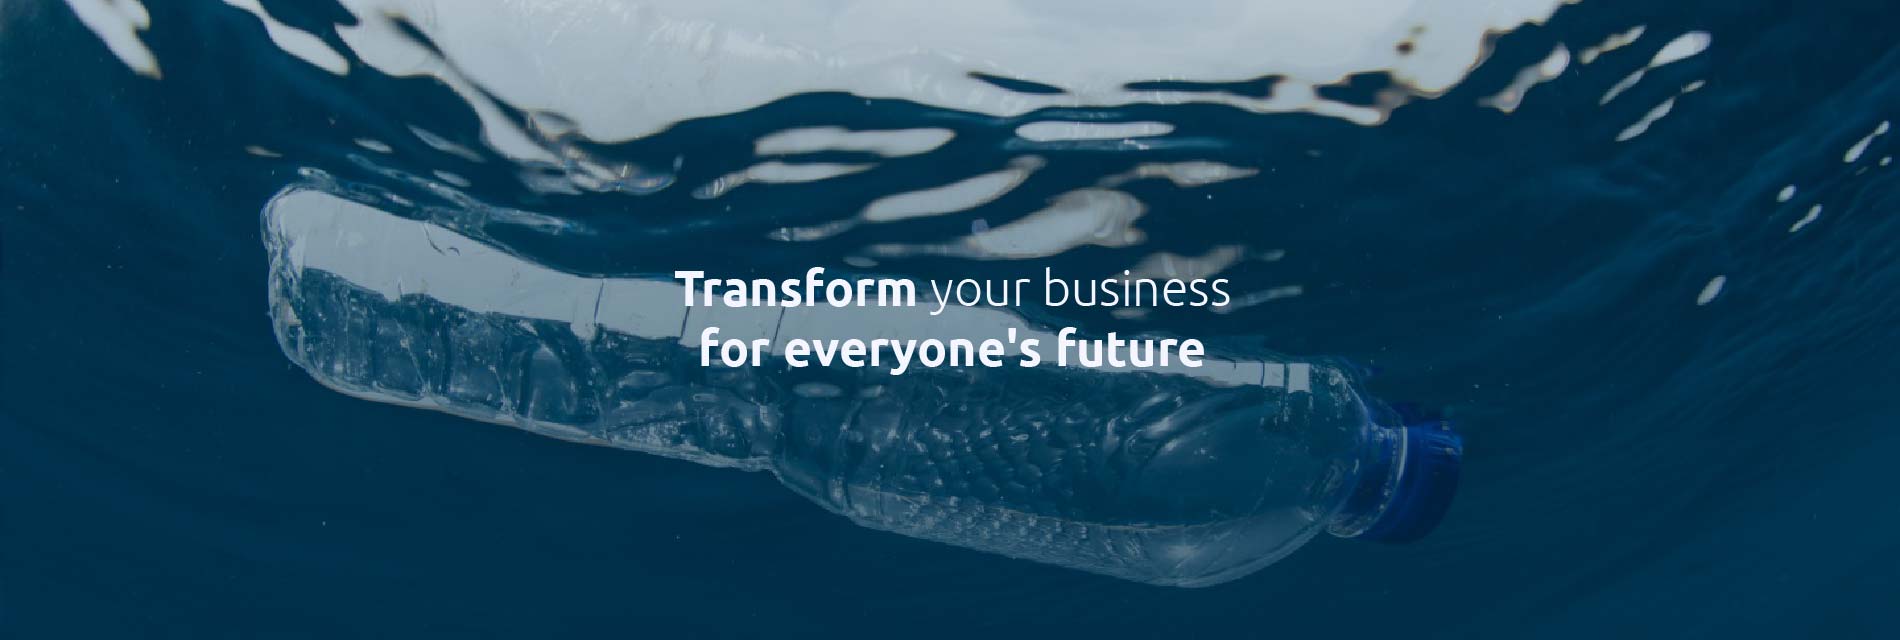 Transform your business for everyones future